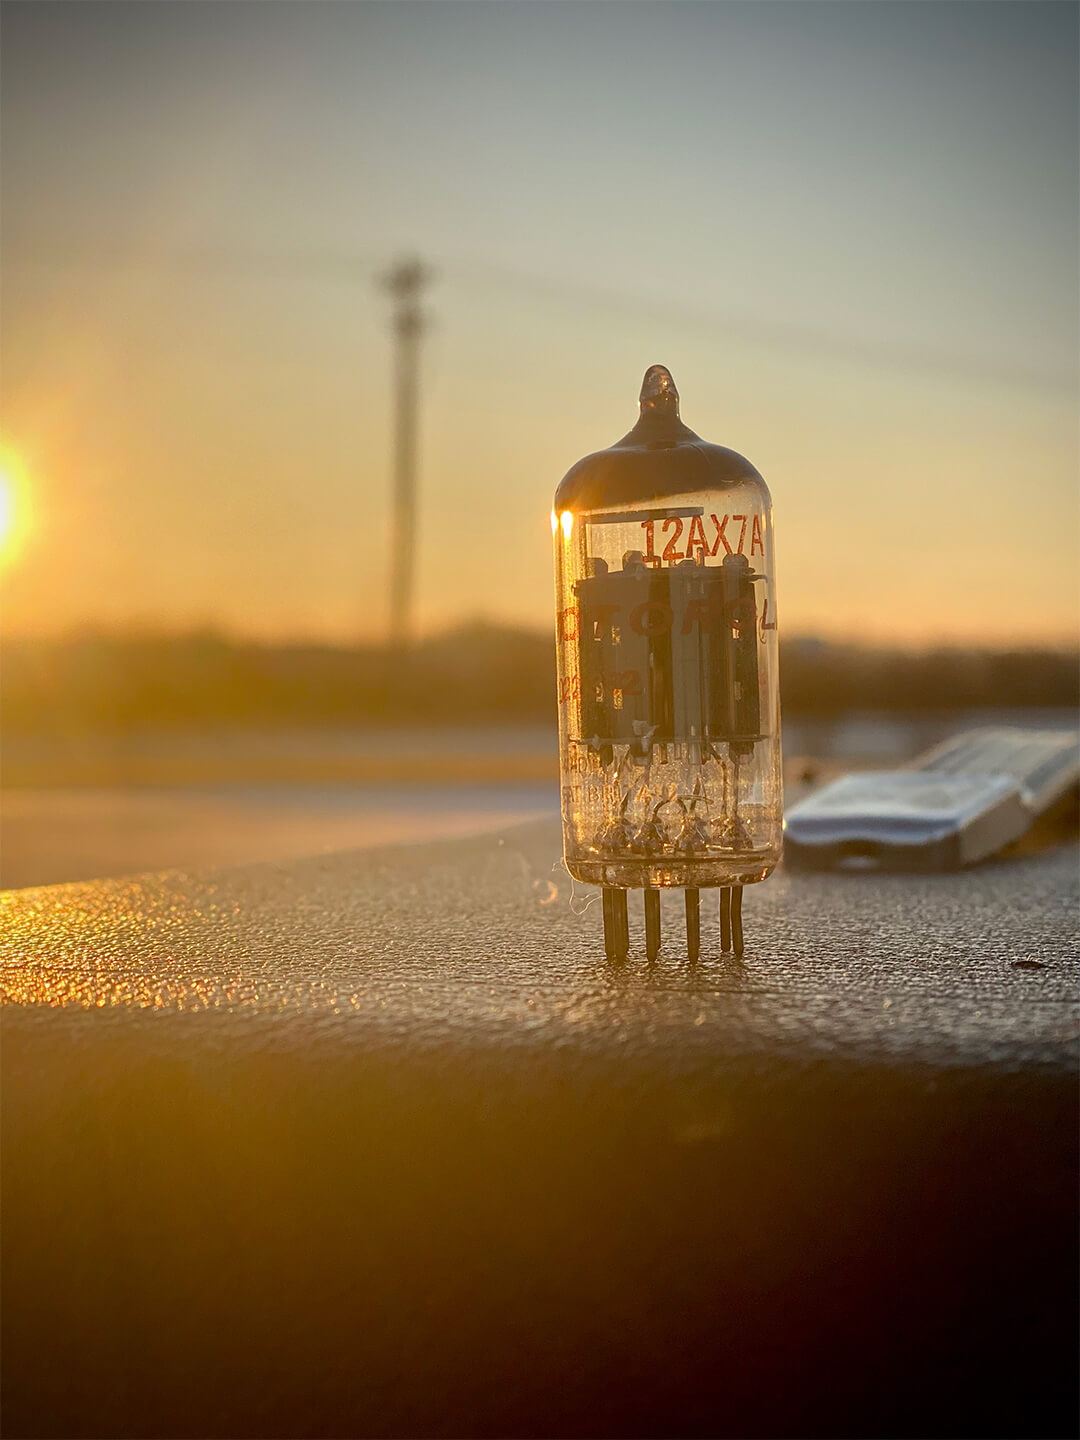 A vintage tube on top of an amp set against a sunset scene